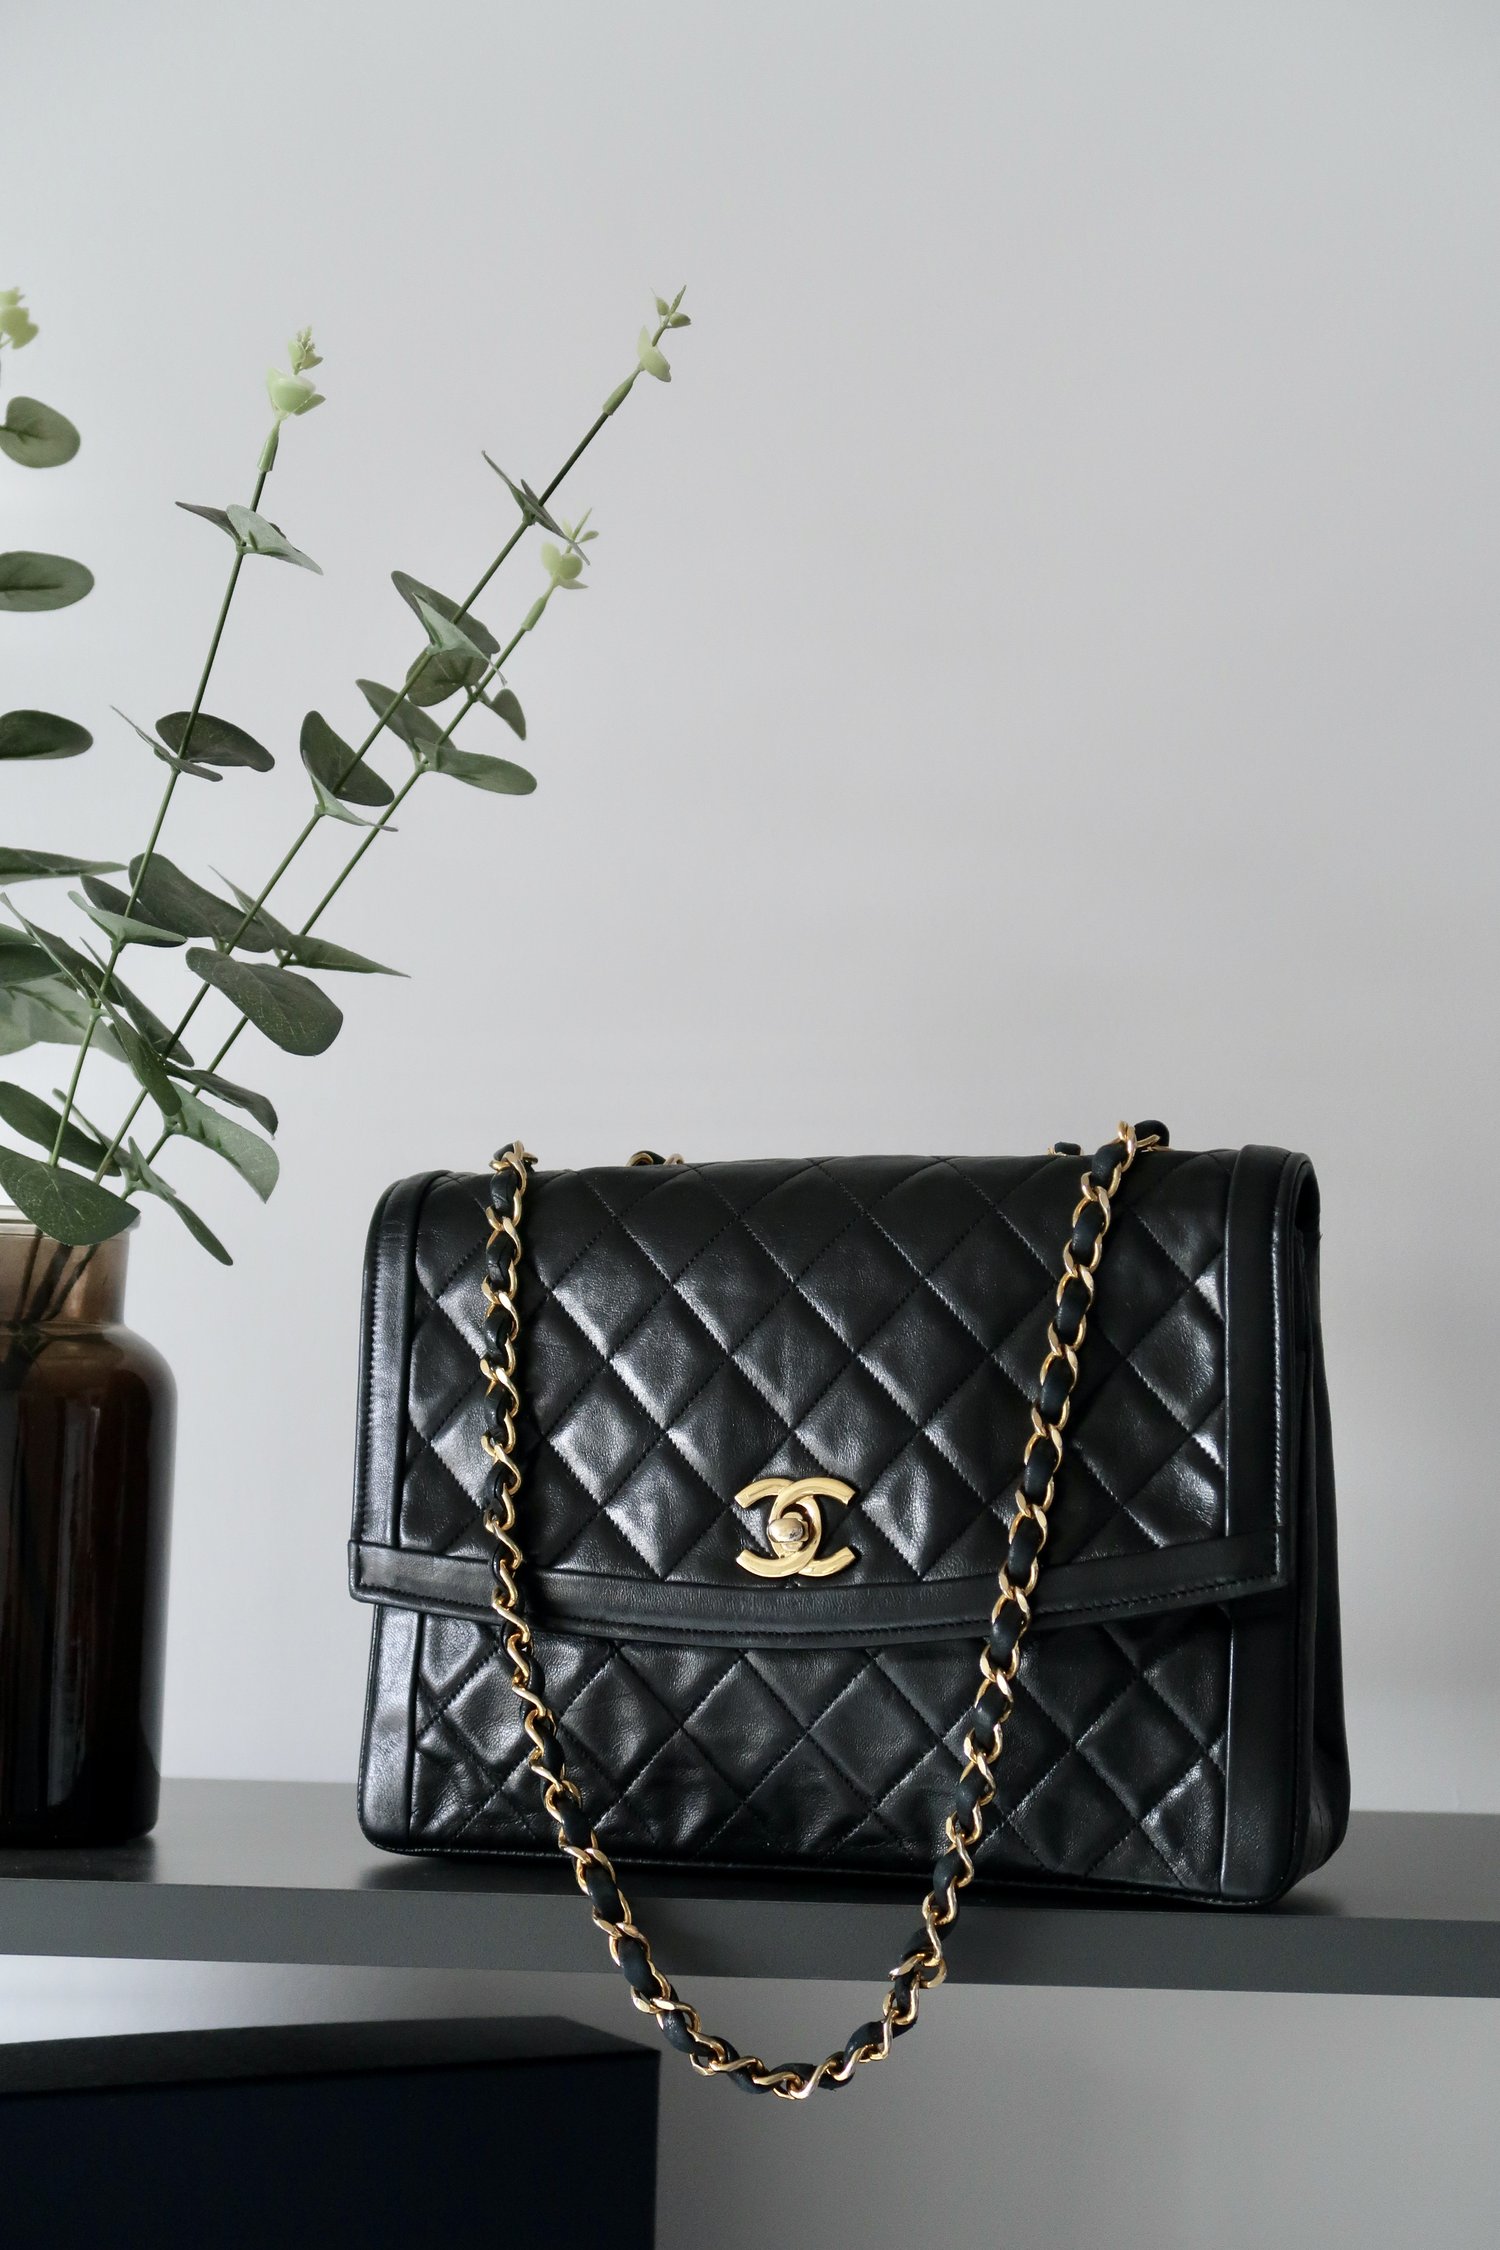 Vintage Chanel Black Quilted Caviar Mini Square Flap Bag - Mrs